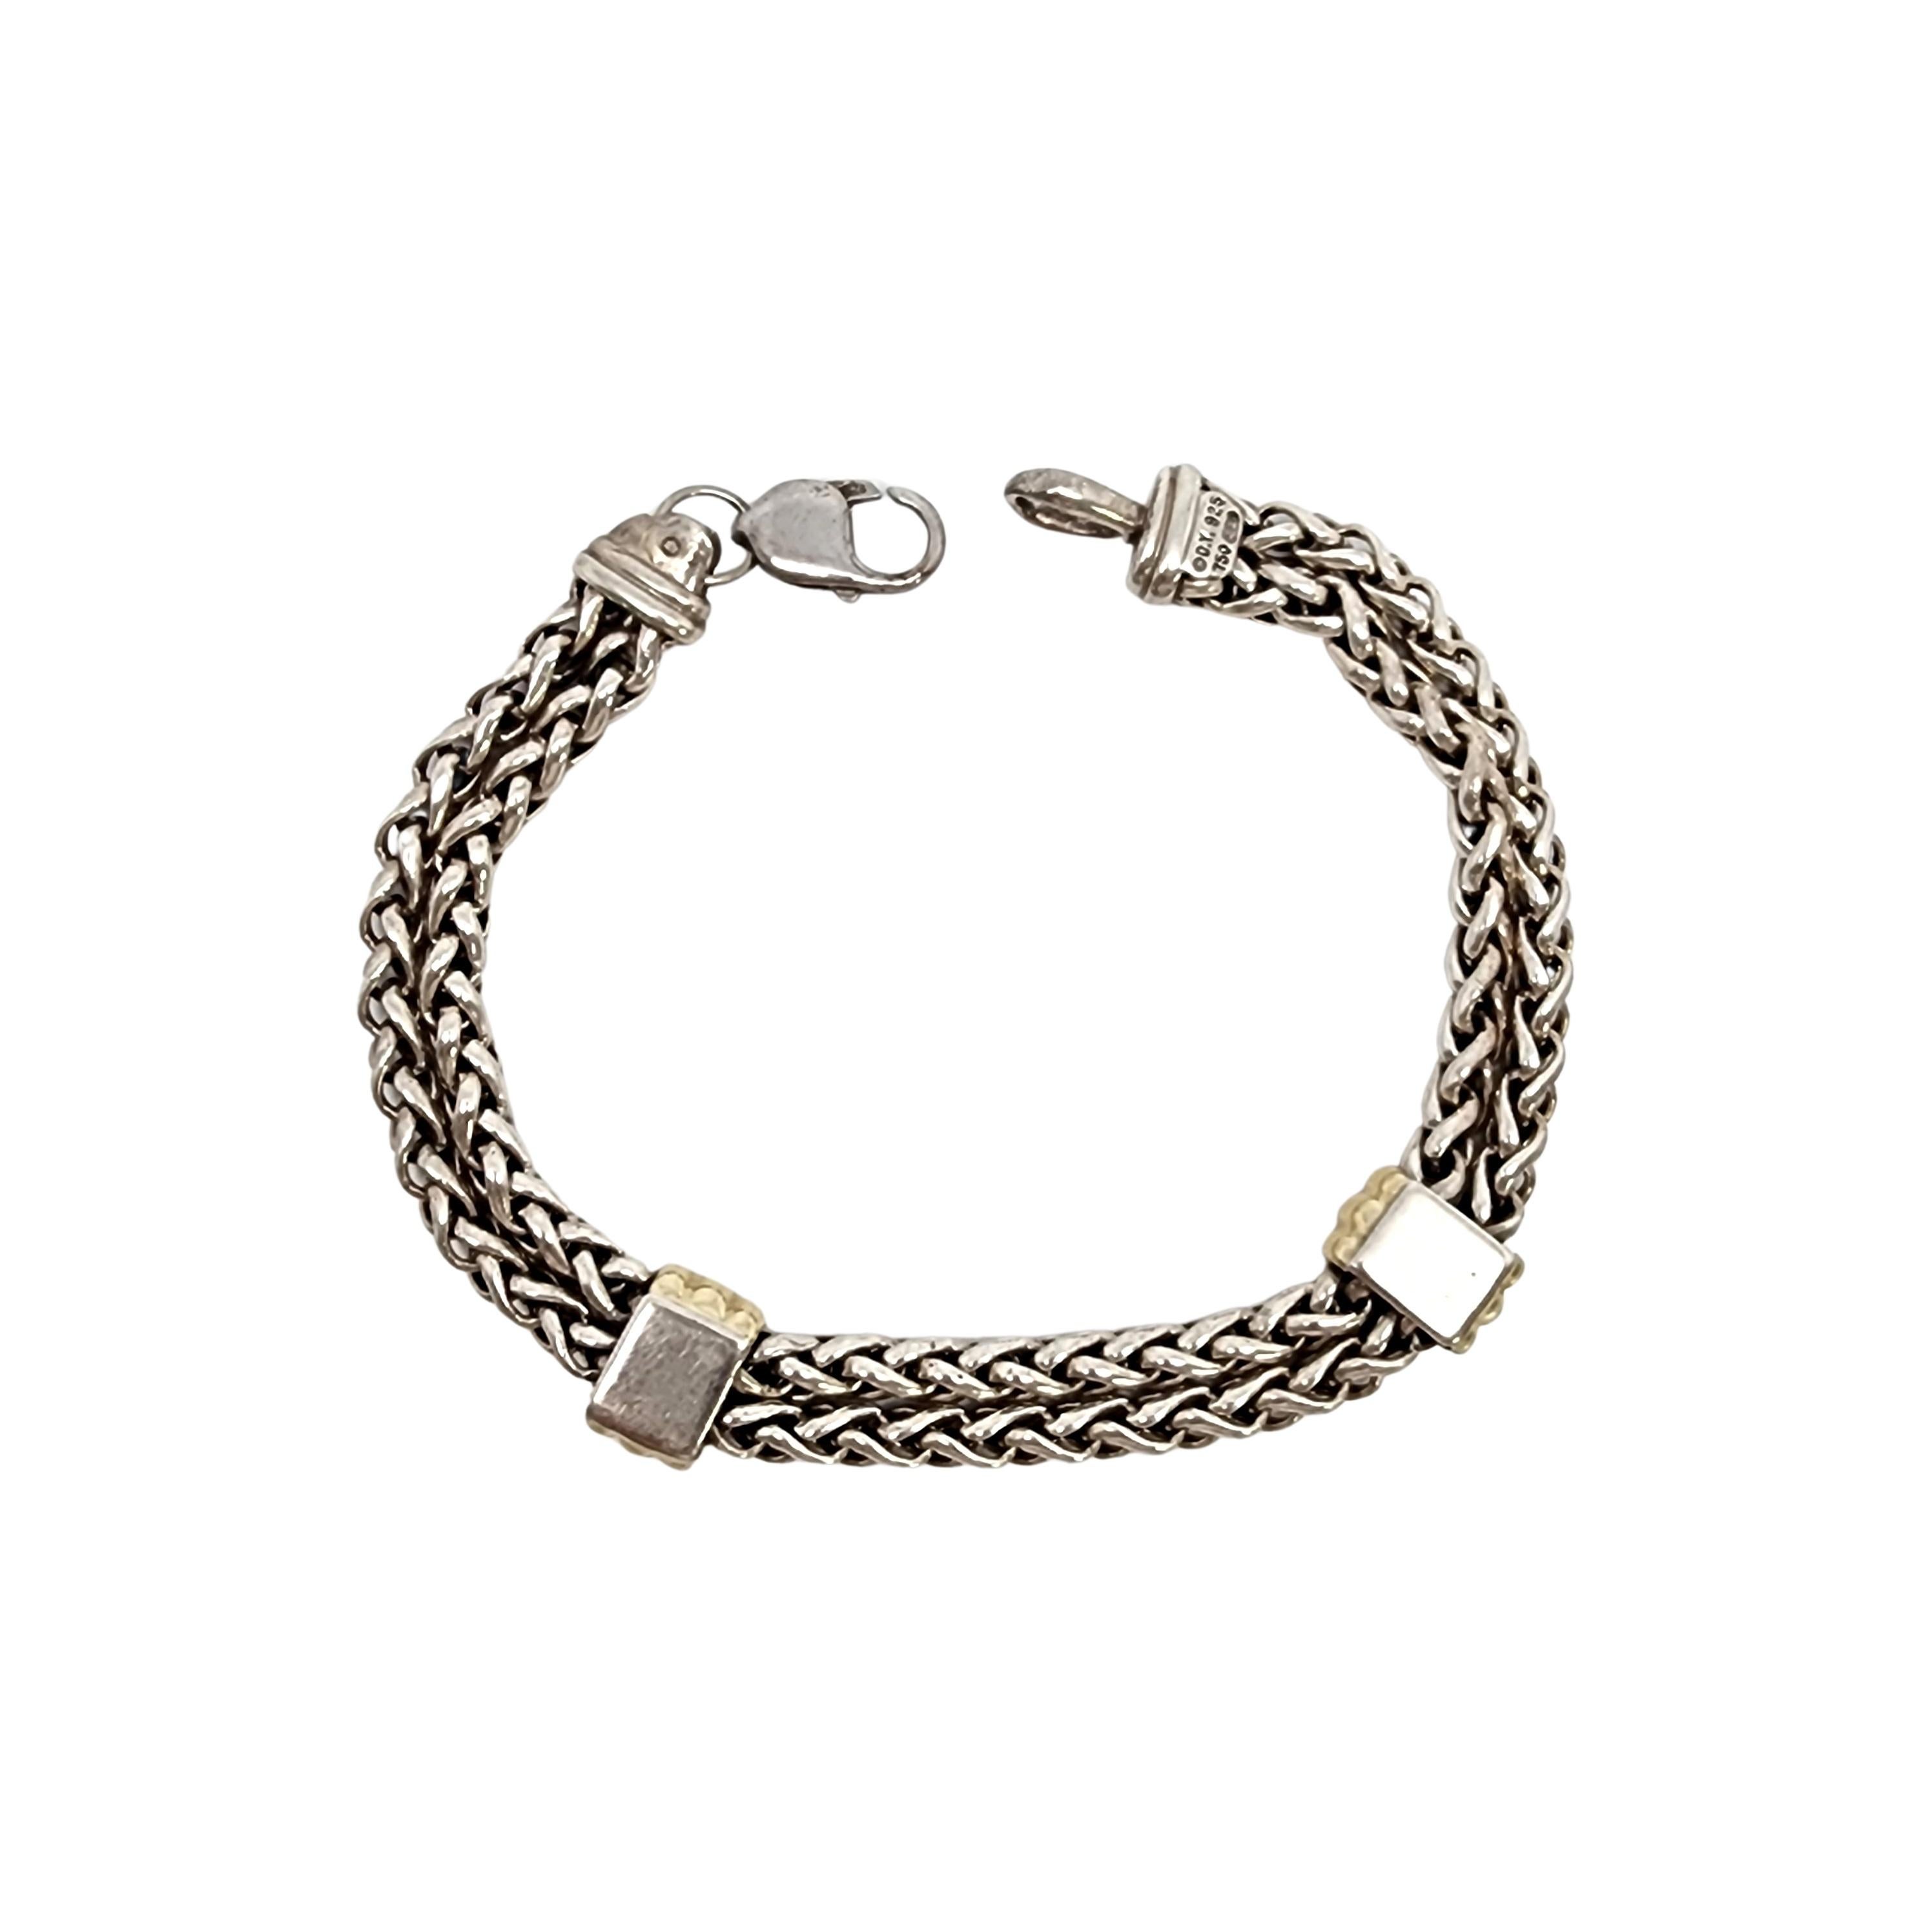 Sterling silver double wheat strand 18K yellow gold plated station men's bracelet by David Yurman.

Double strand wheat chains with 2 yellow gold plated accented stations. Lobster claw clasp.

**The clasp appears to have had a loop added to it most